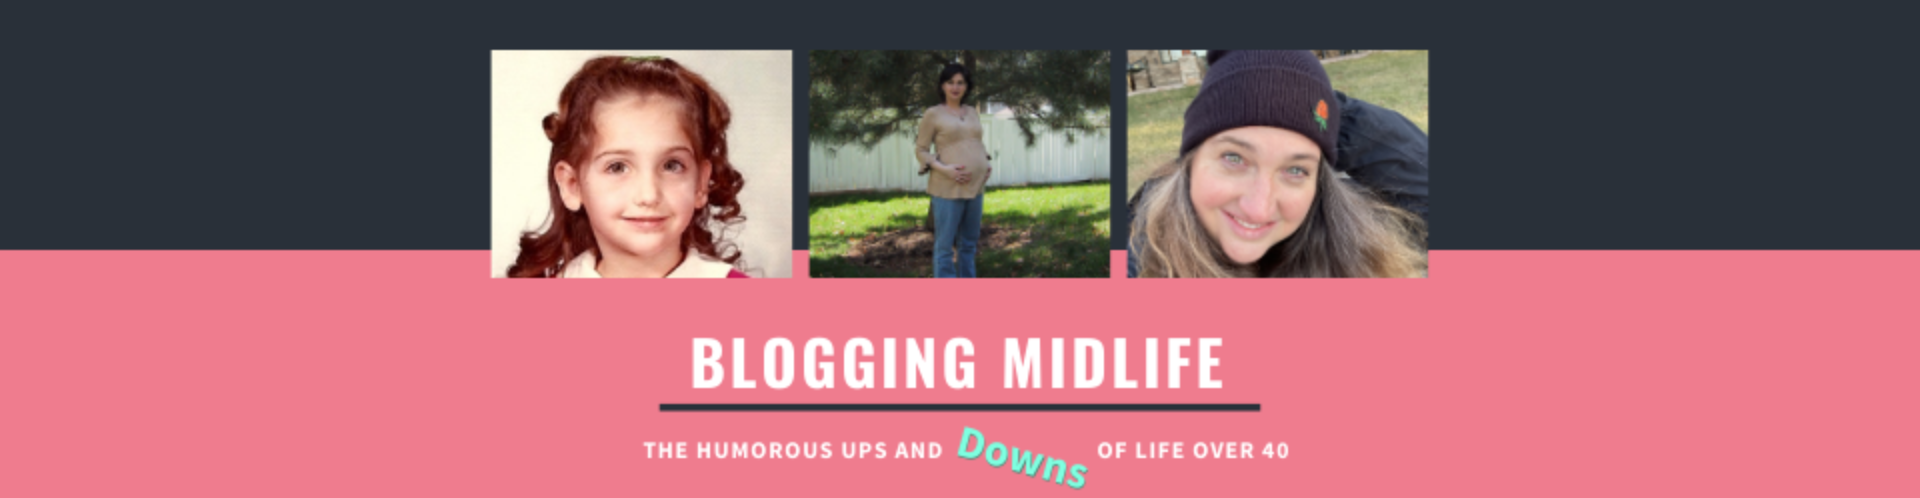 Dowagers hump, my lovely lady lump! - BLOGGING MIDLIFE